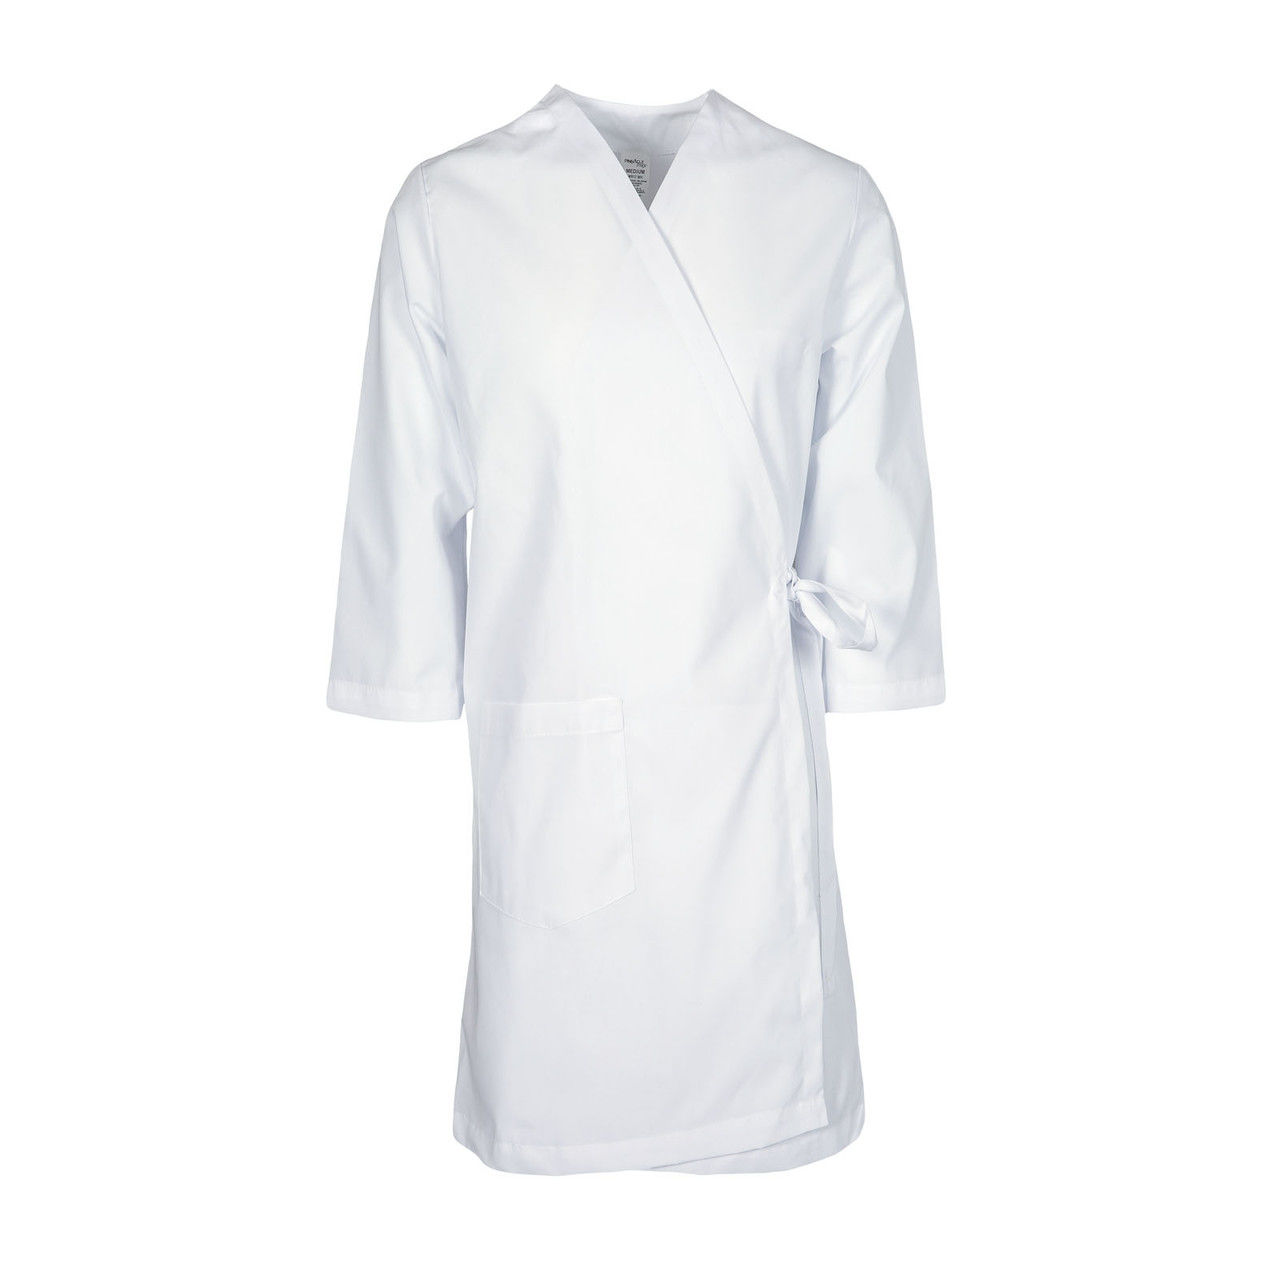 Can you describe the design of the smock gown known as the 'Wraparound Smock Gown with Pockets'?